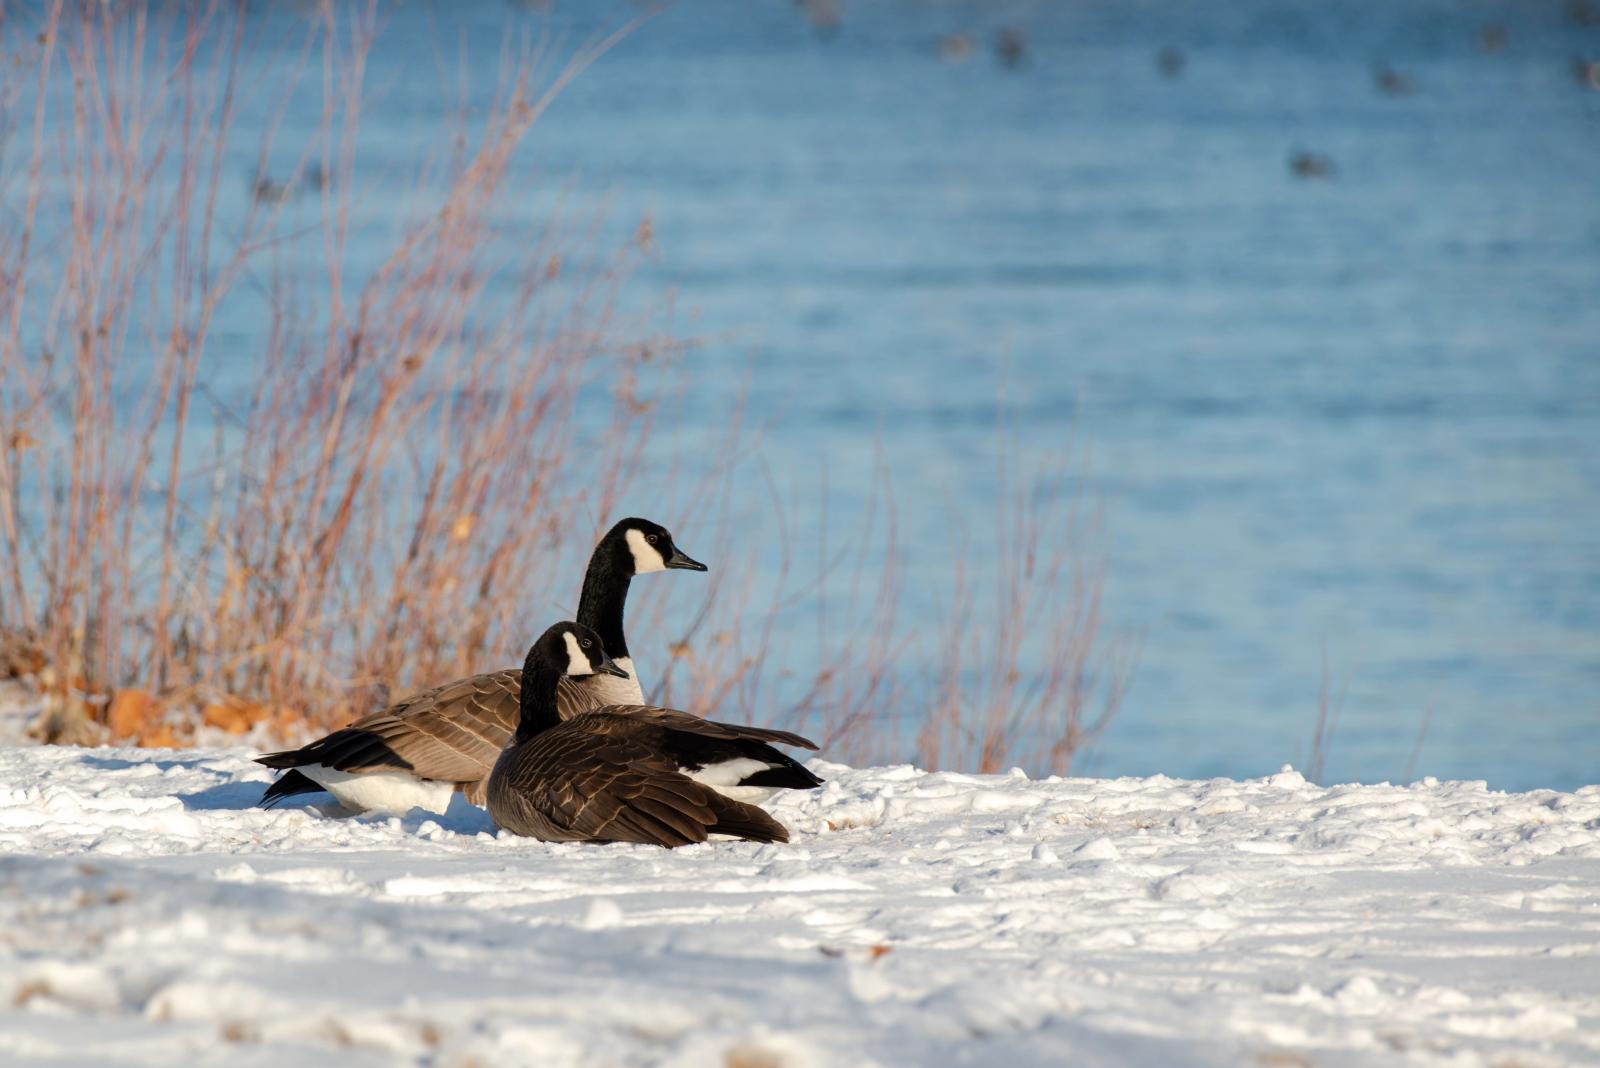 Two Canada geese sitting on a snowy bank next to a body of water.